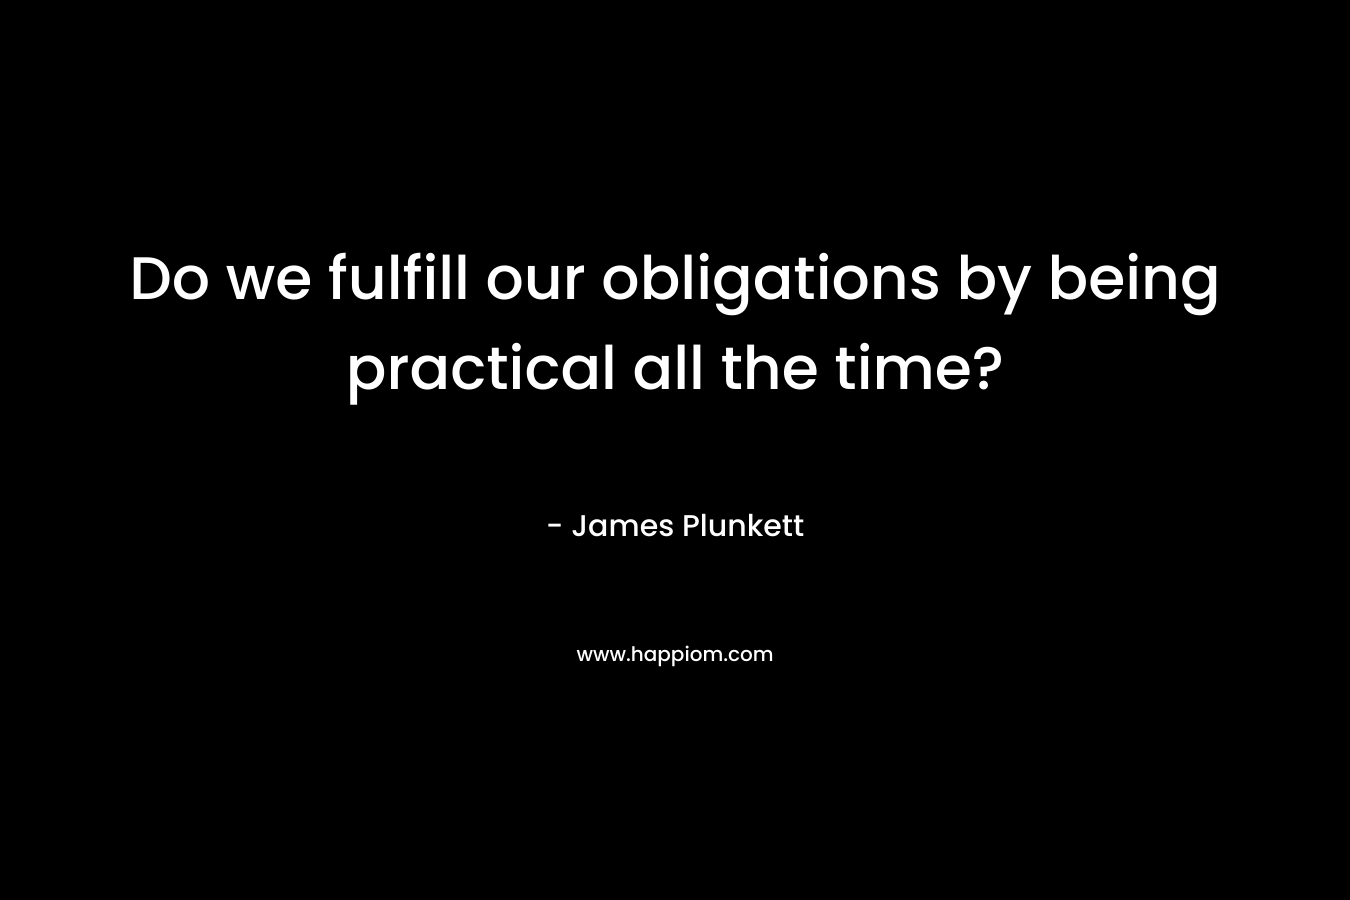 Do we fulfill our obligations by being practical all the time? – James Plunkett